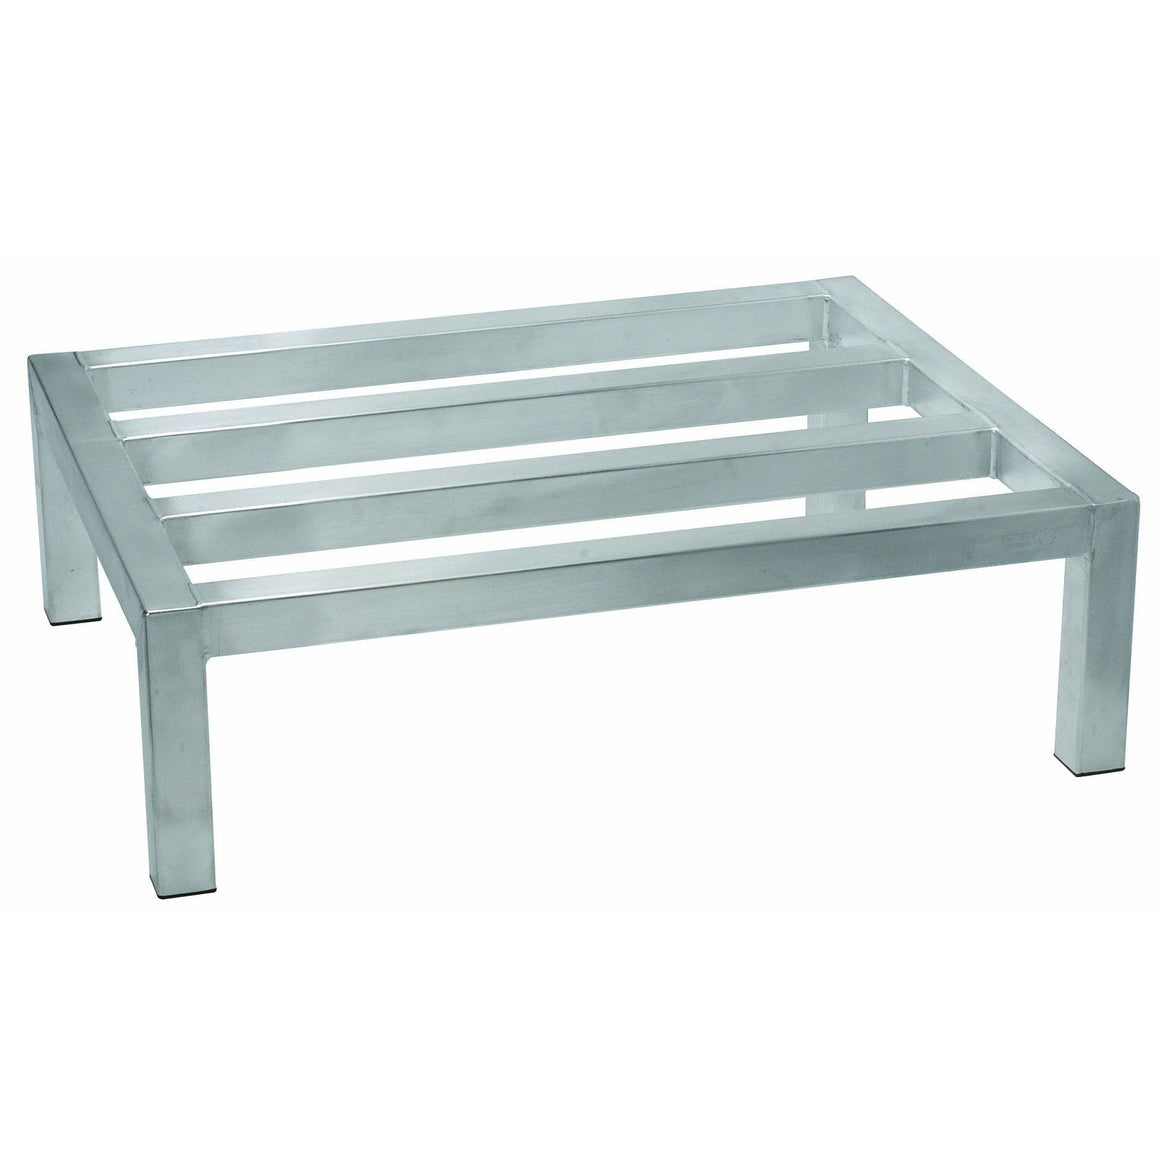 Winco - ASDR-1424 - Dunnage Rack, 14" x 24" x 8", Aluminum - Shelving - Maltese & Co New and Used  restaurant Equipment 